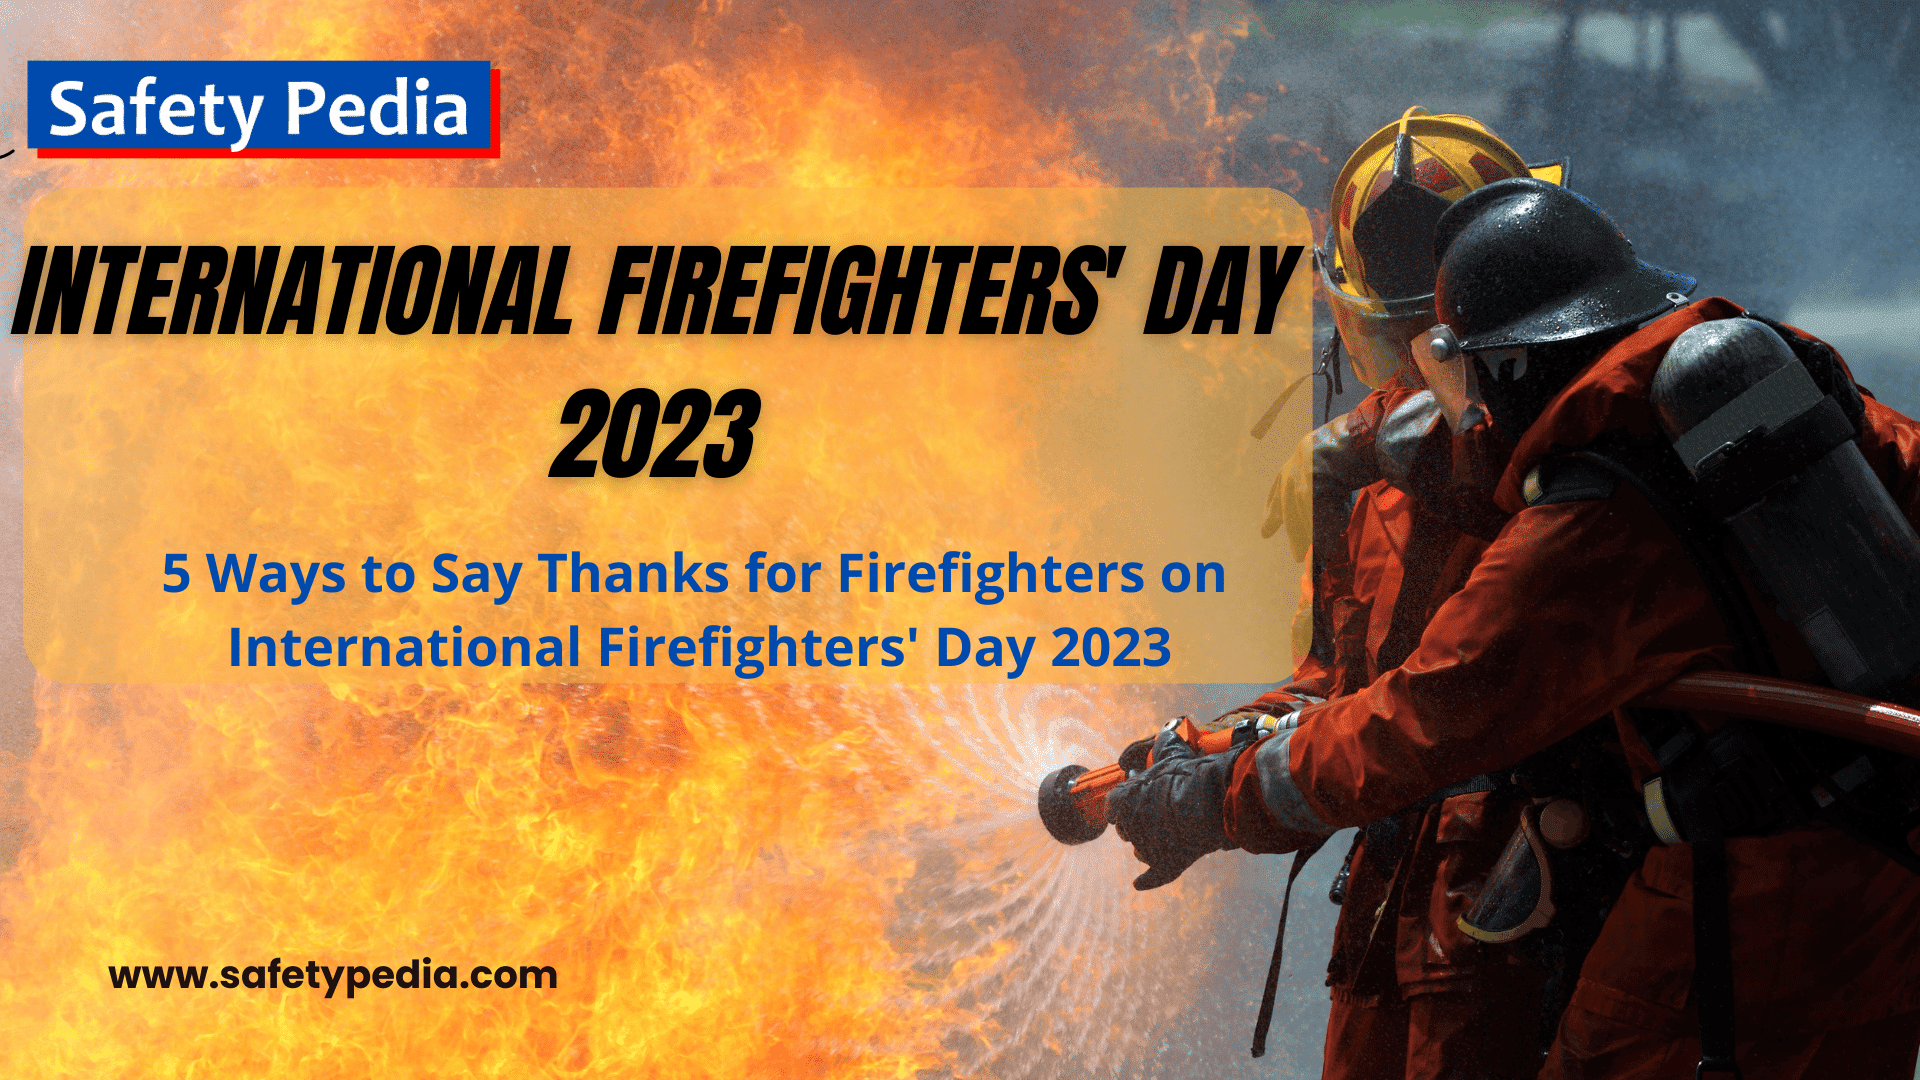 5 Ways to Say Thanks for Firefighters on International Firefighters' Day 2023